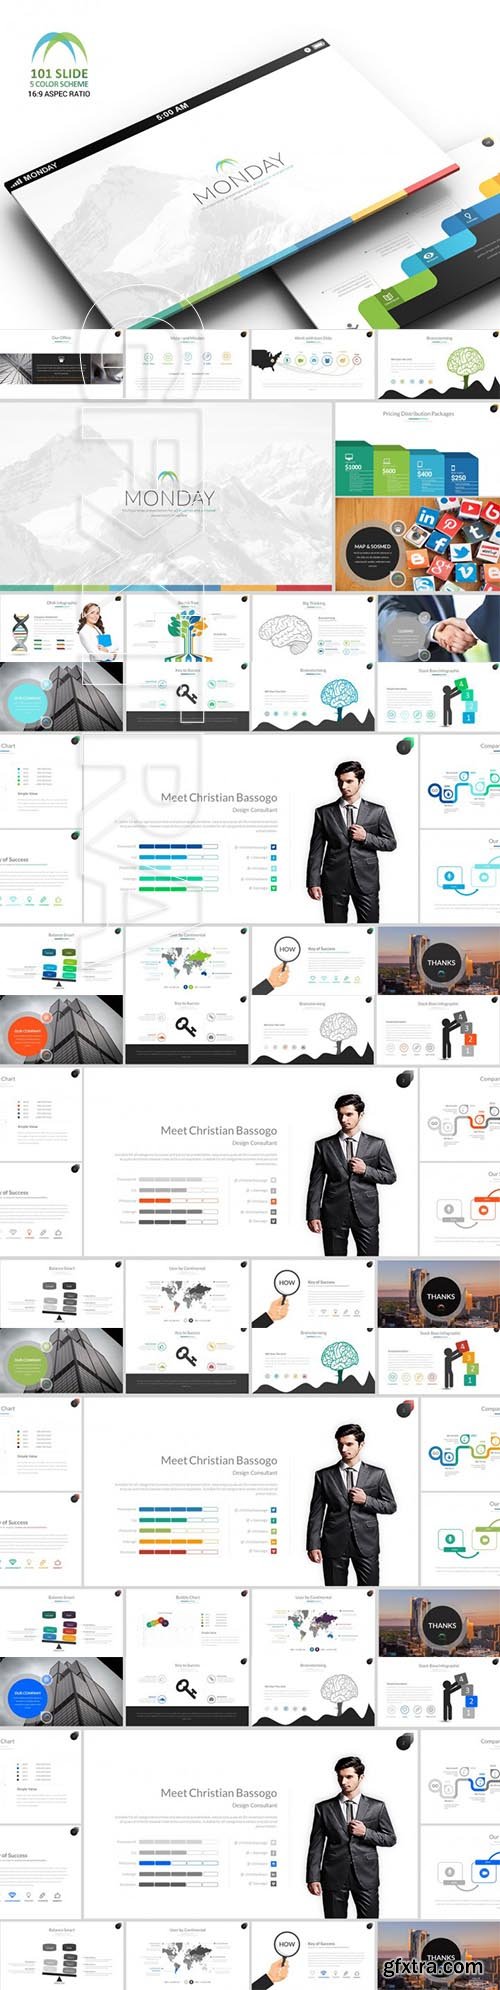 Monday Powerpoint Template